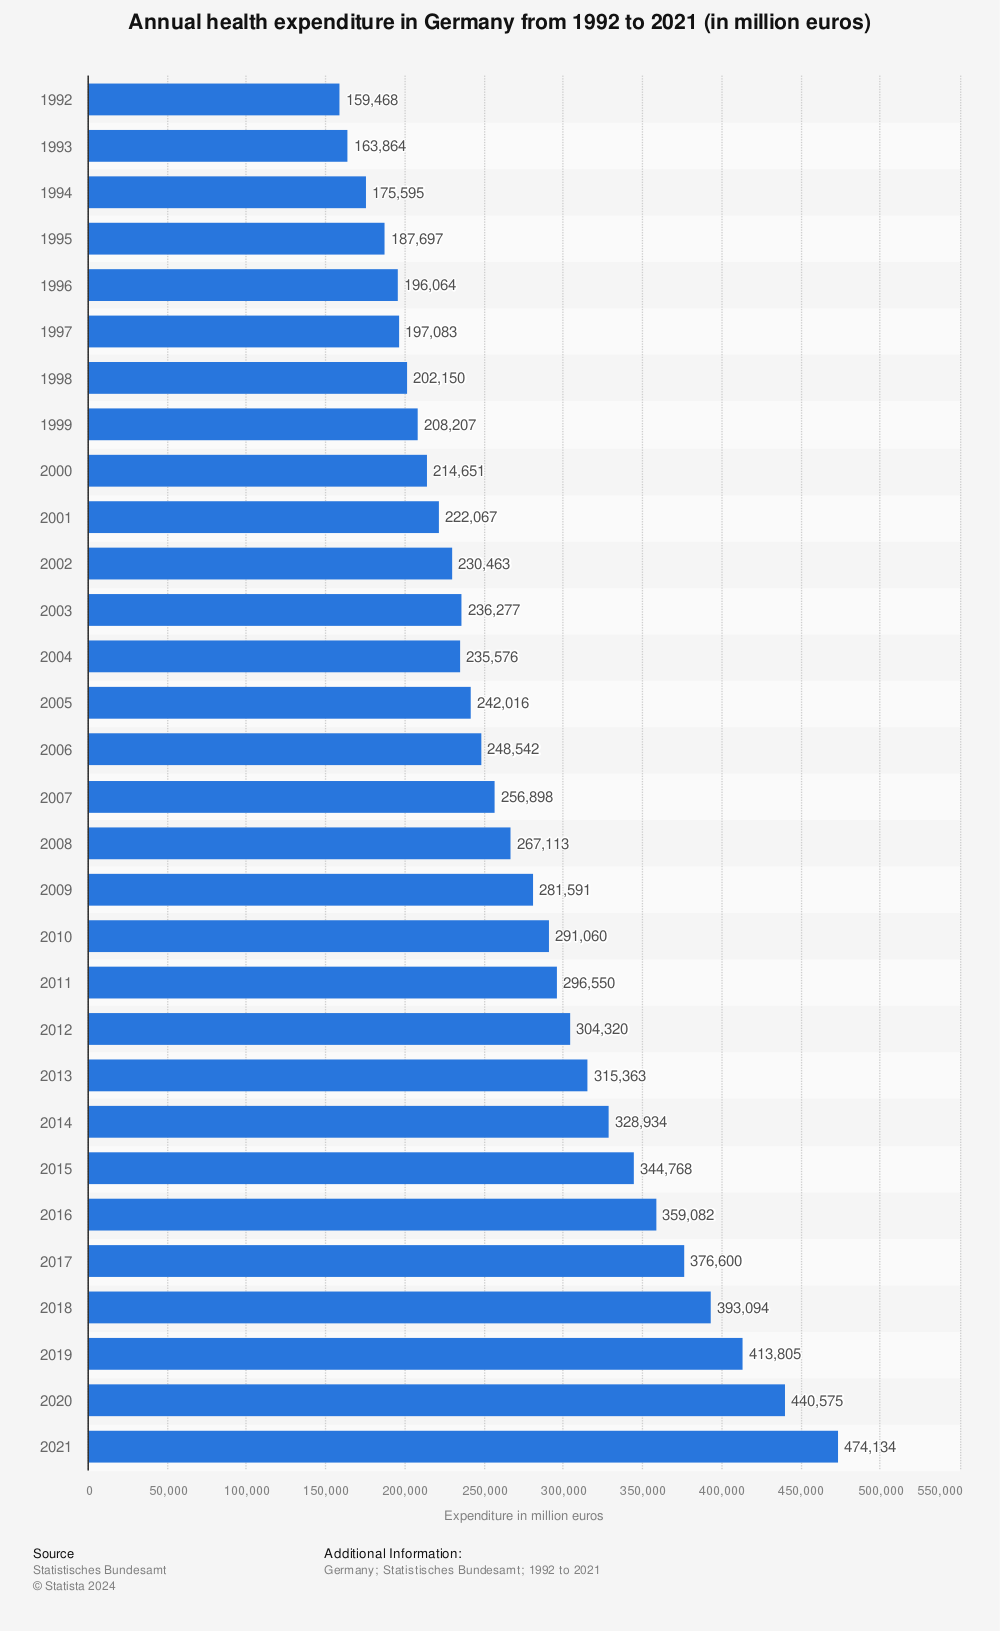 Statistic: Annual health expenditure in Germany from 1992 to 2020 (in million euros) | Statista